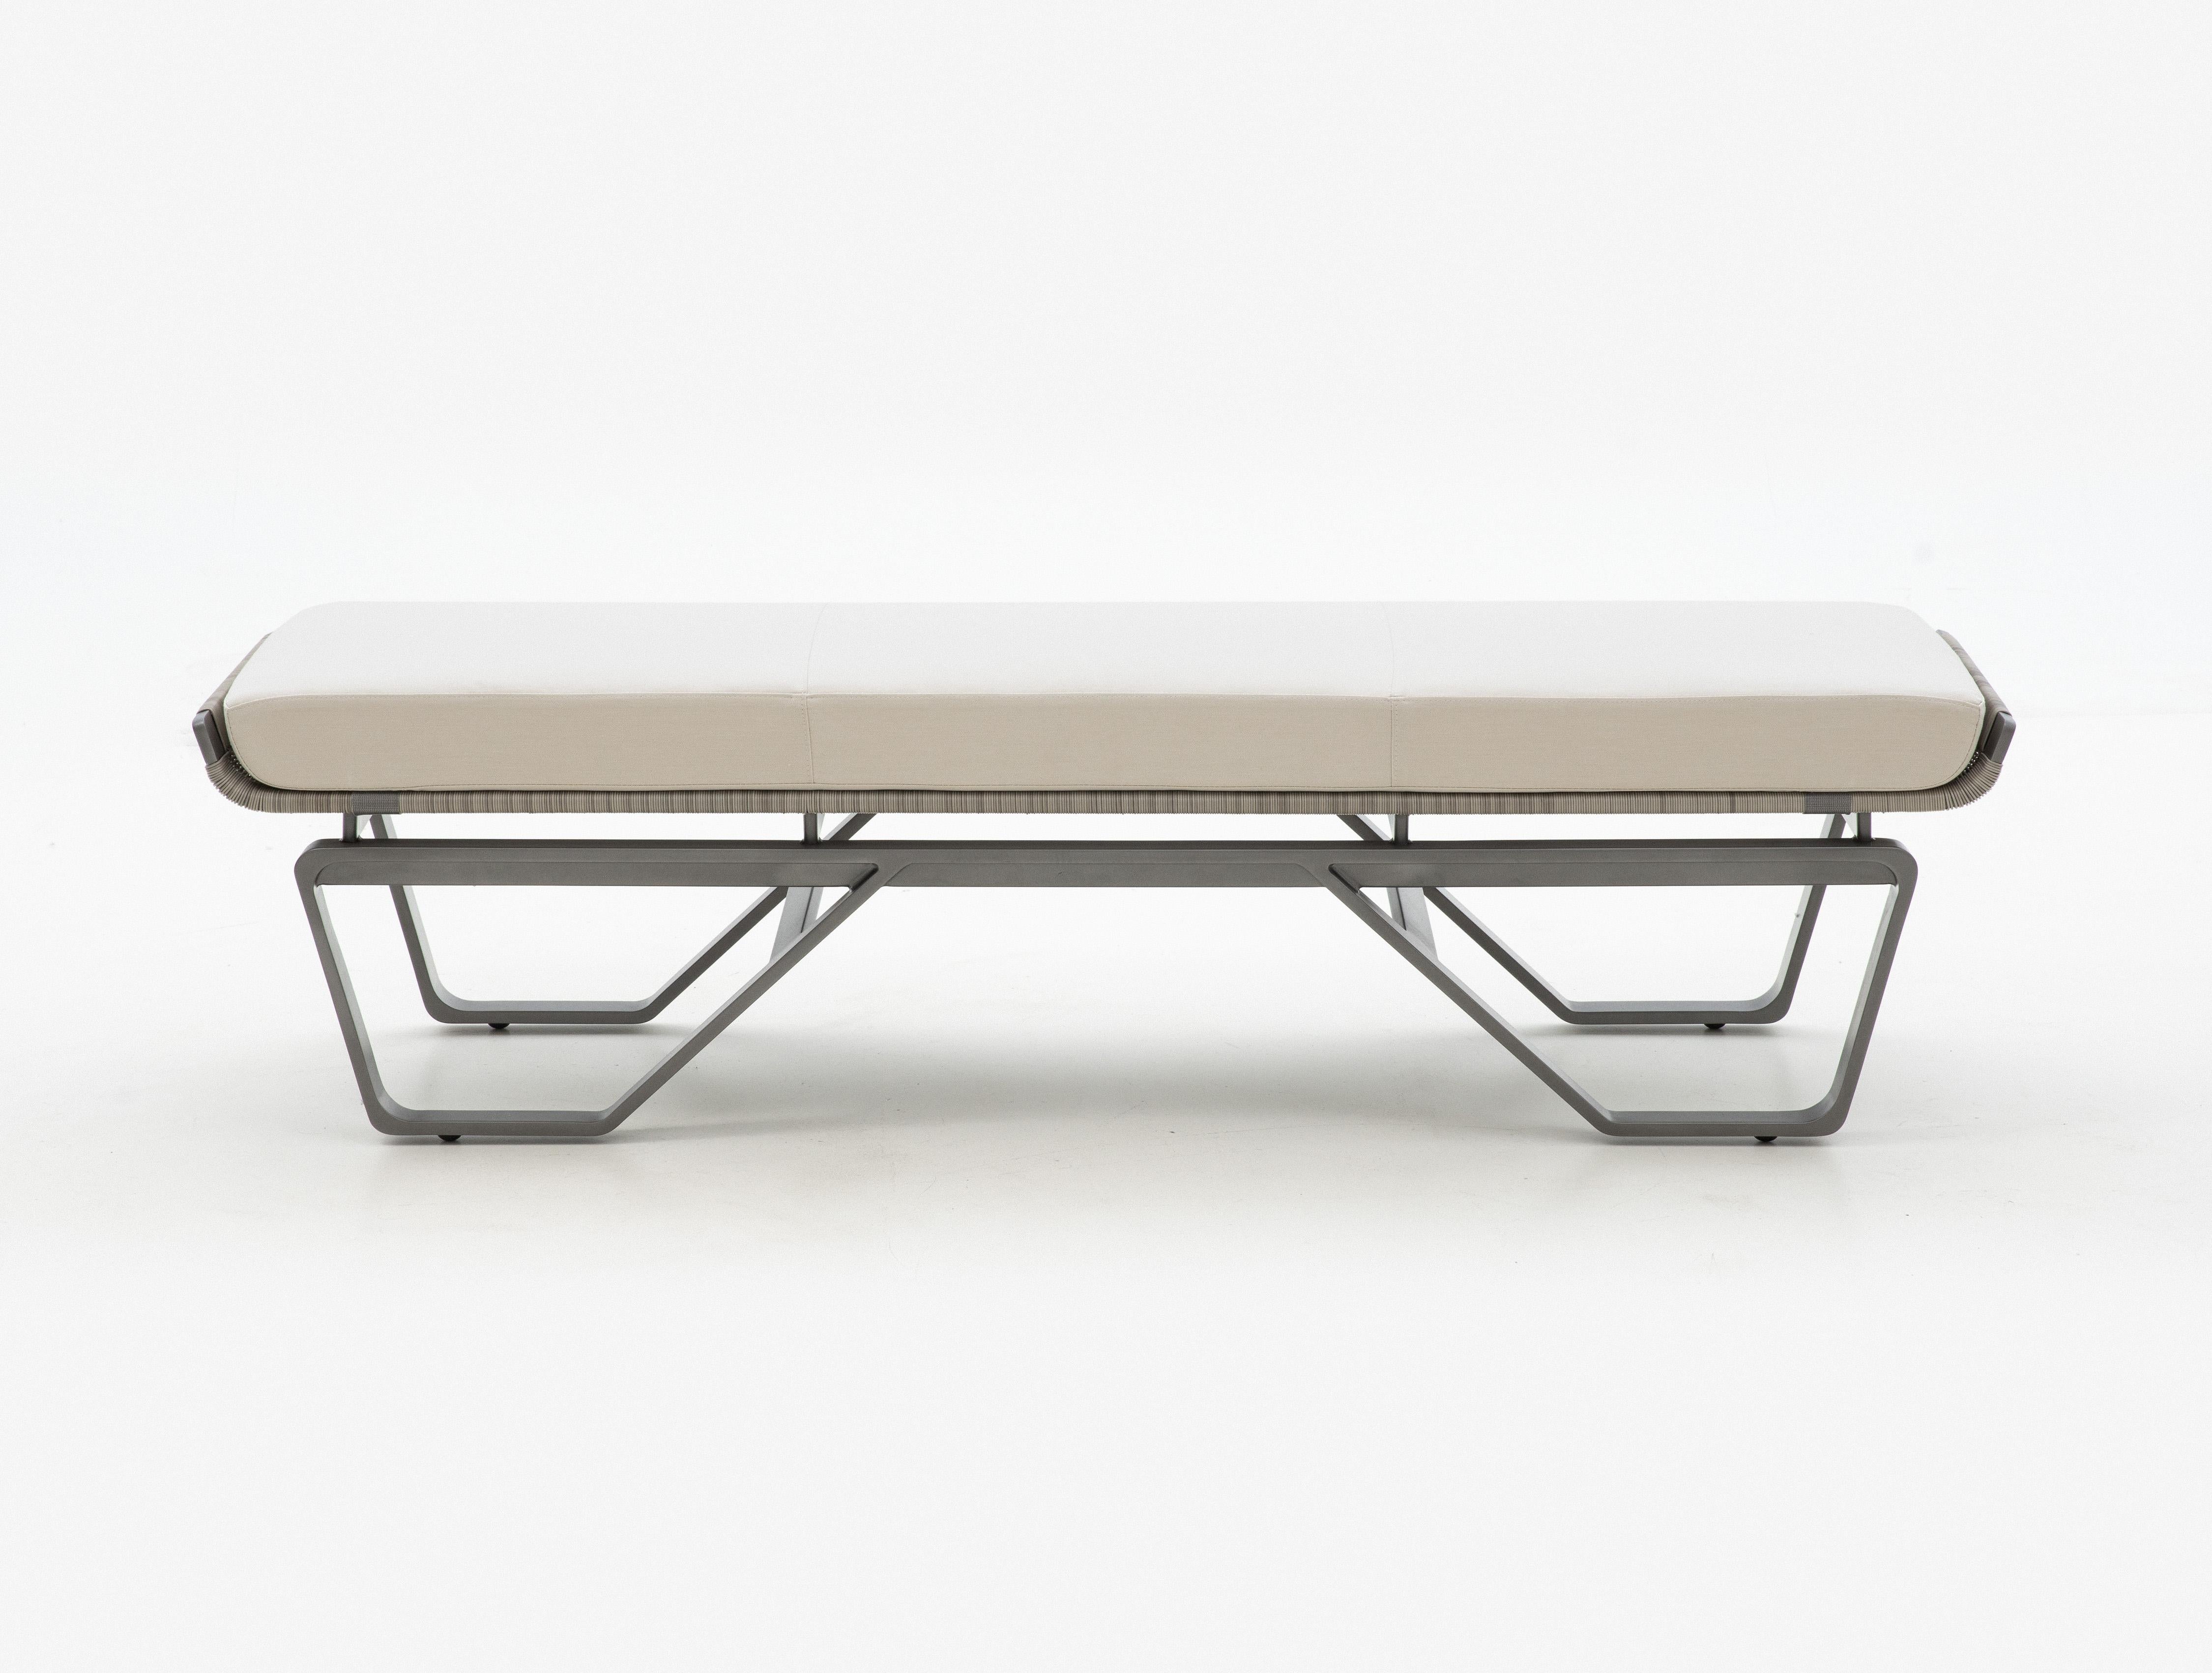 Drawing on the dynamic personality of our Meduse Table, the Meduse Bench adds new options for communal seating in an outdoor tableau. With a seat slightly higher than a typical bench, its dimensions make it ideal for placement poolside or around a